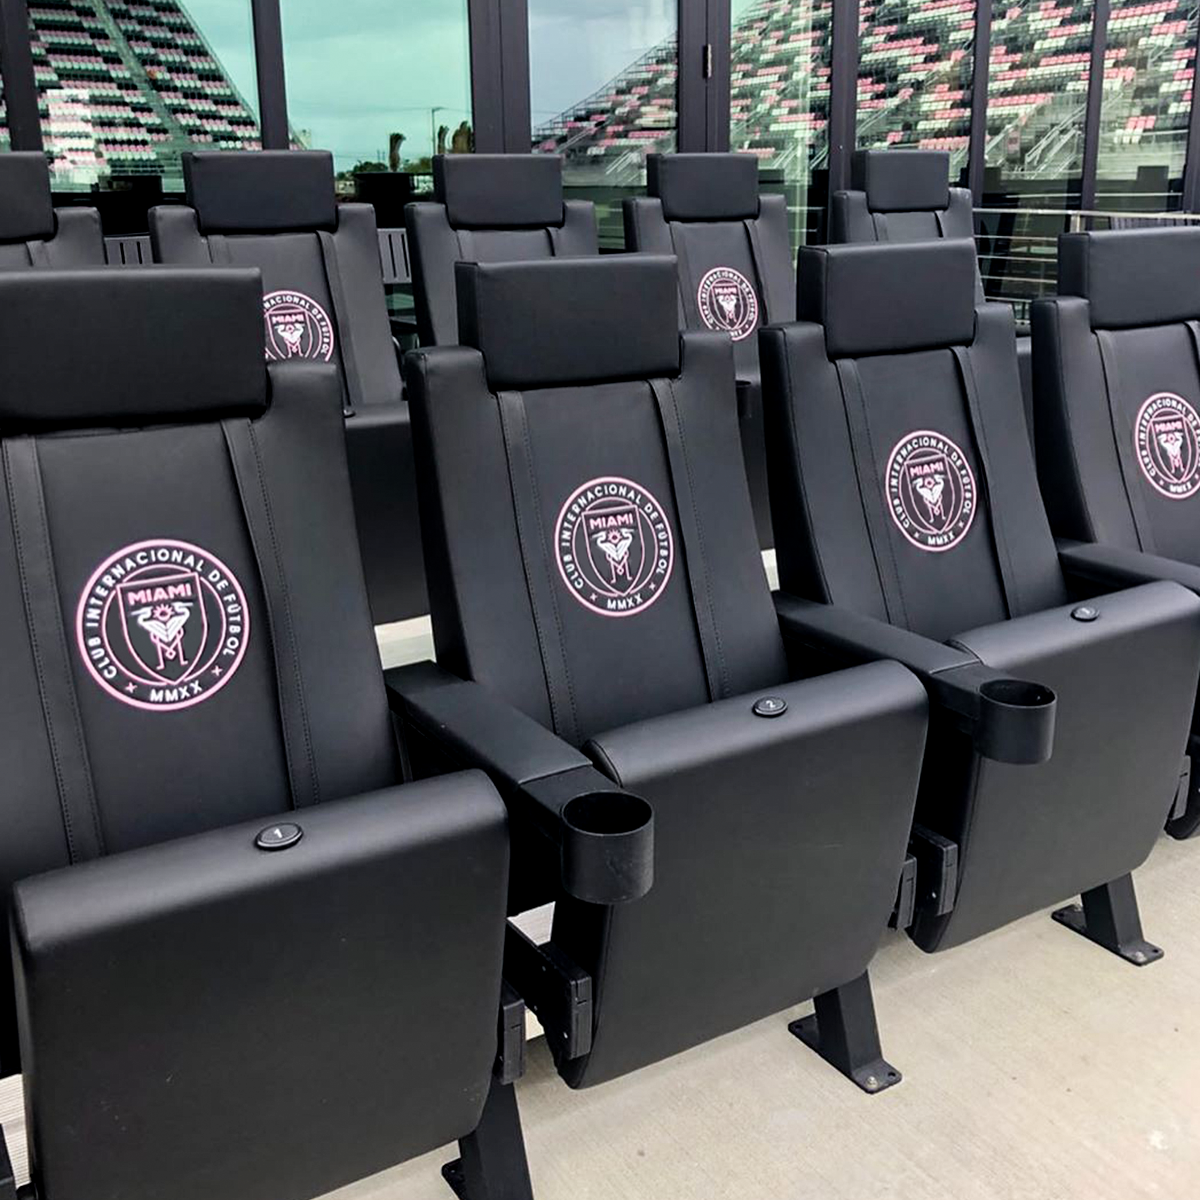 SuiteMax 3.5 VIP Seats with Boston Red Sox Logo